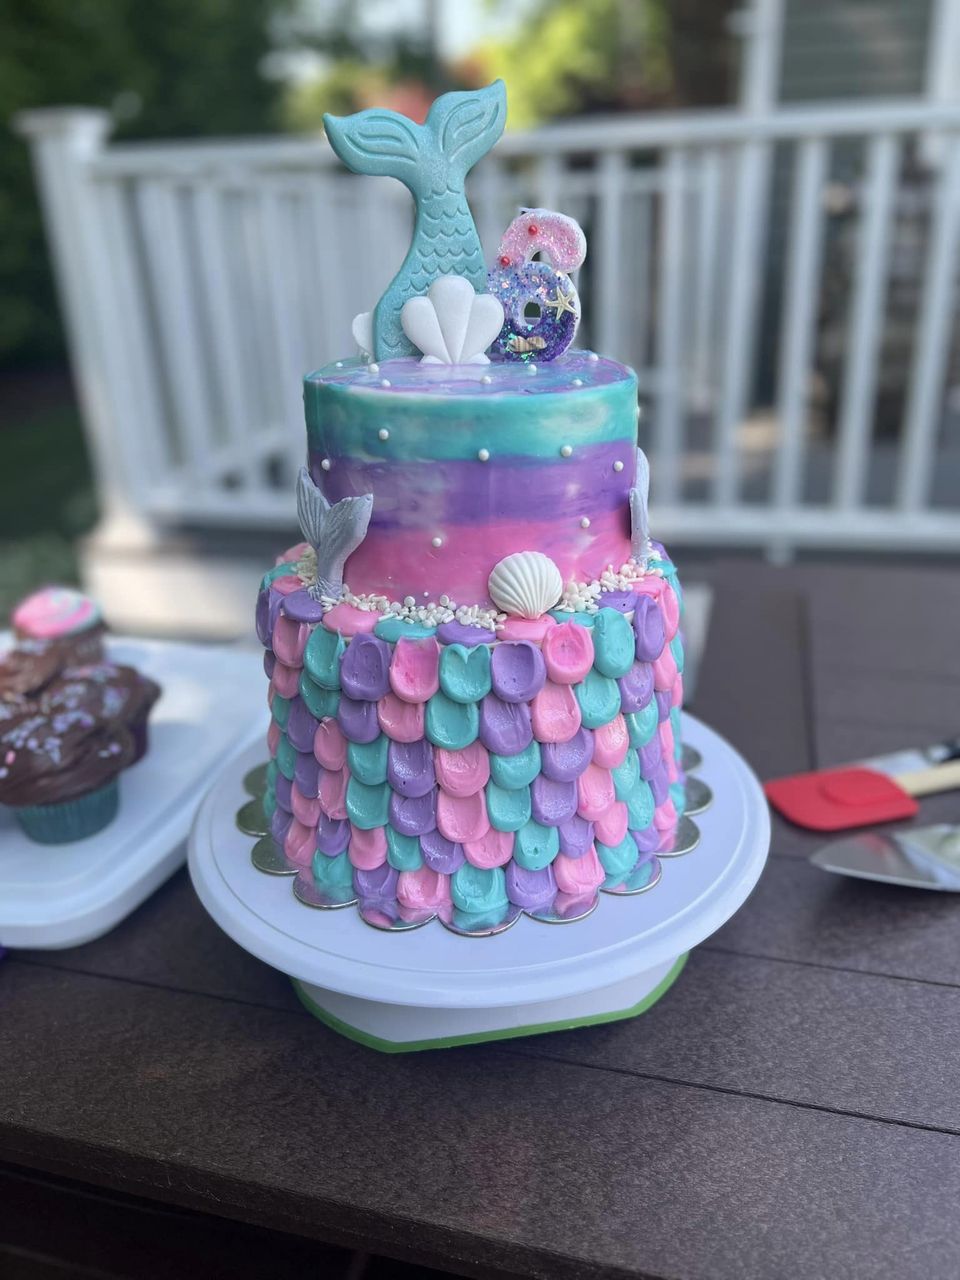 🧜🏻‍♀️🐚🎂 Capture the magic of the sea with these delightful mermaid cake ideas that will enchant your little one and guests alike.